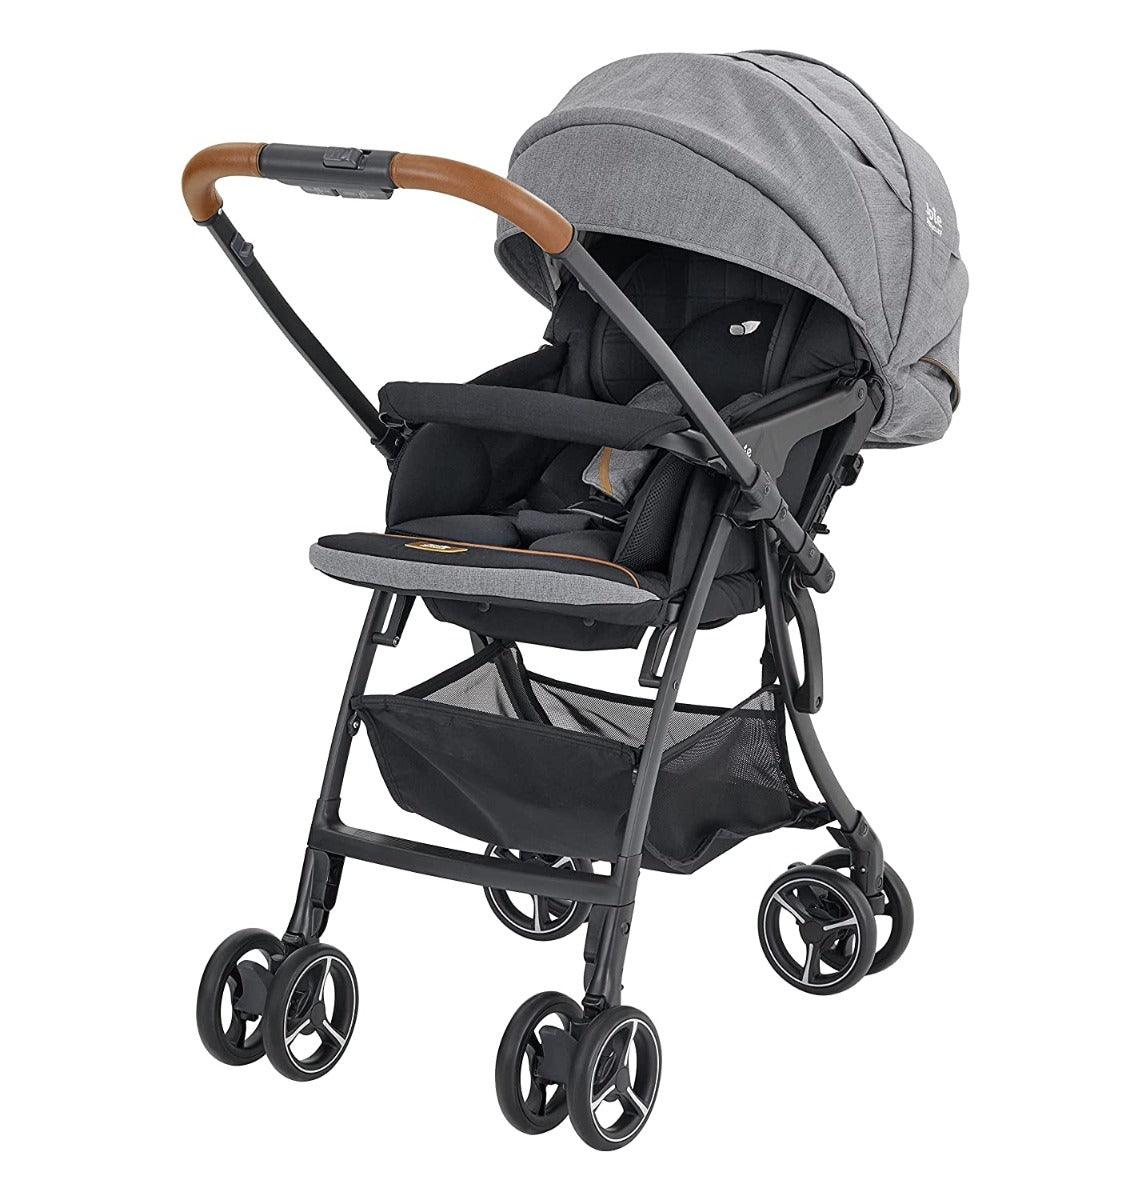 Joie SMA Baggi 4WD Drift Baby Pram Carbon - Baby Stroller for Ages 0-3 Years